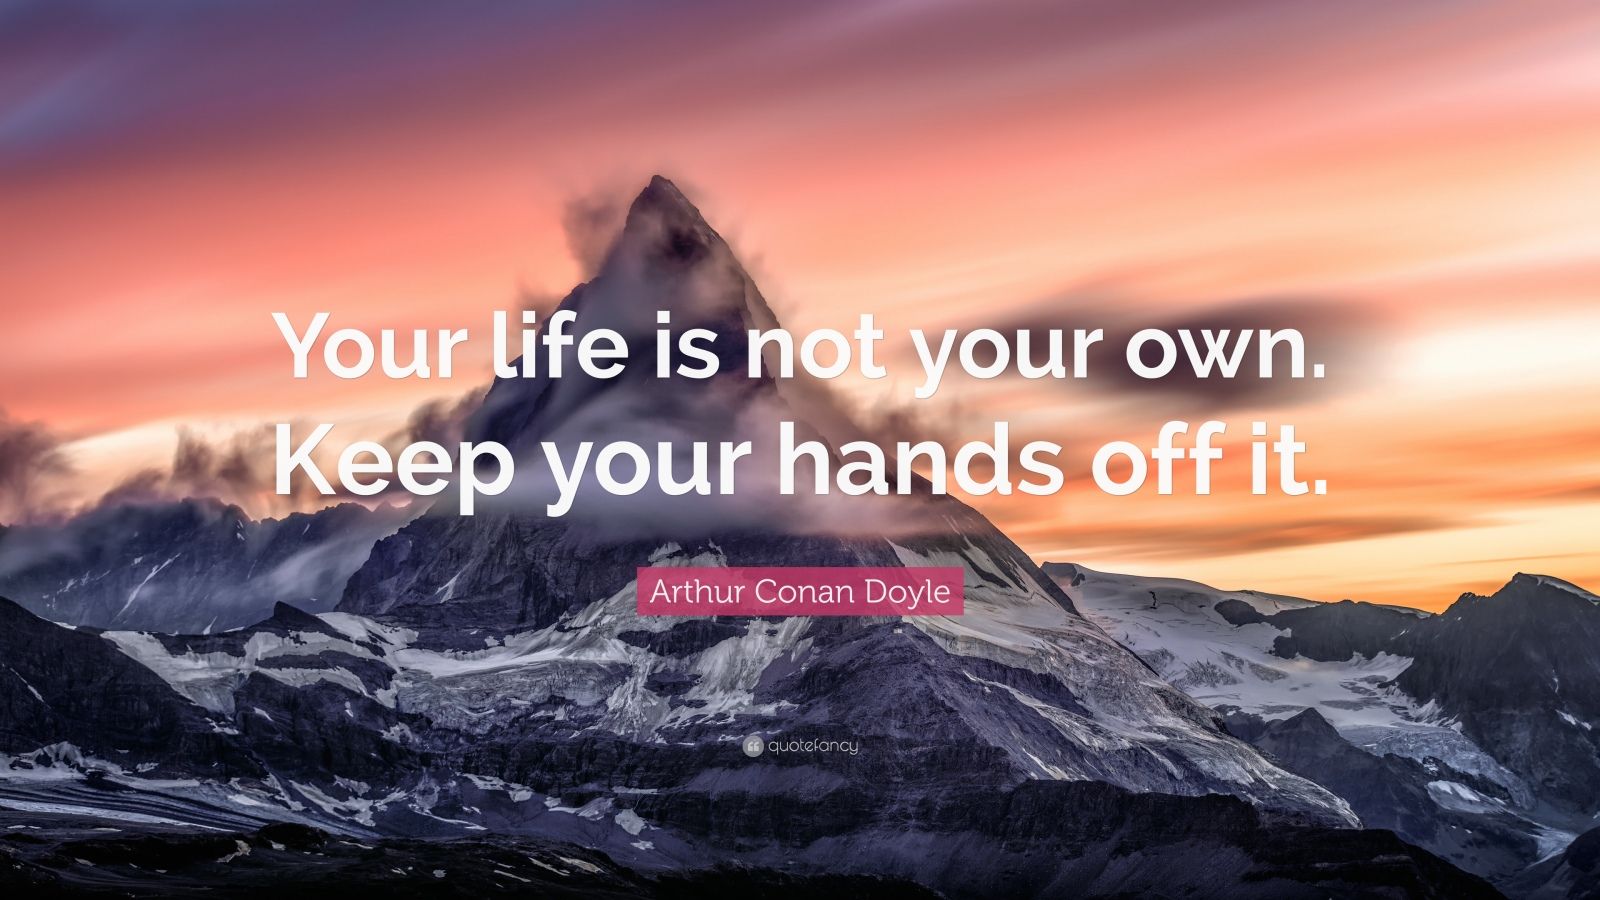 Arthur Conan Doyle Quote “Your life is not your own Keep your hands